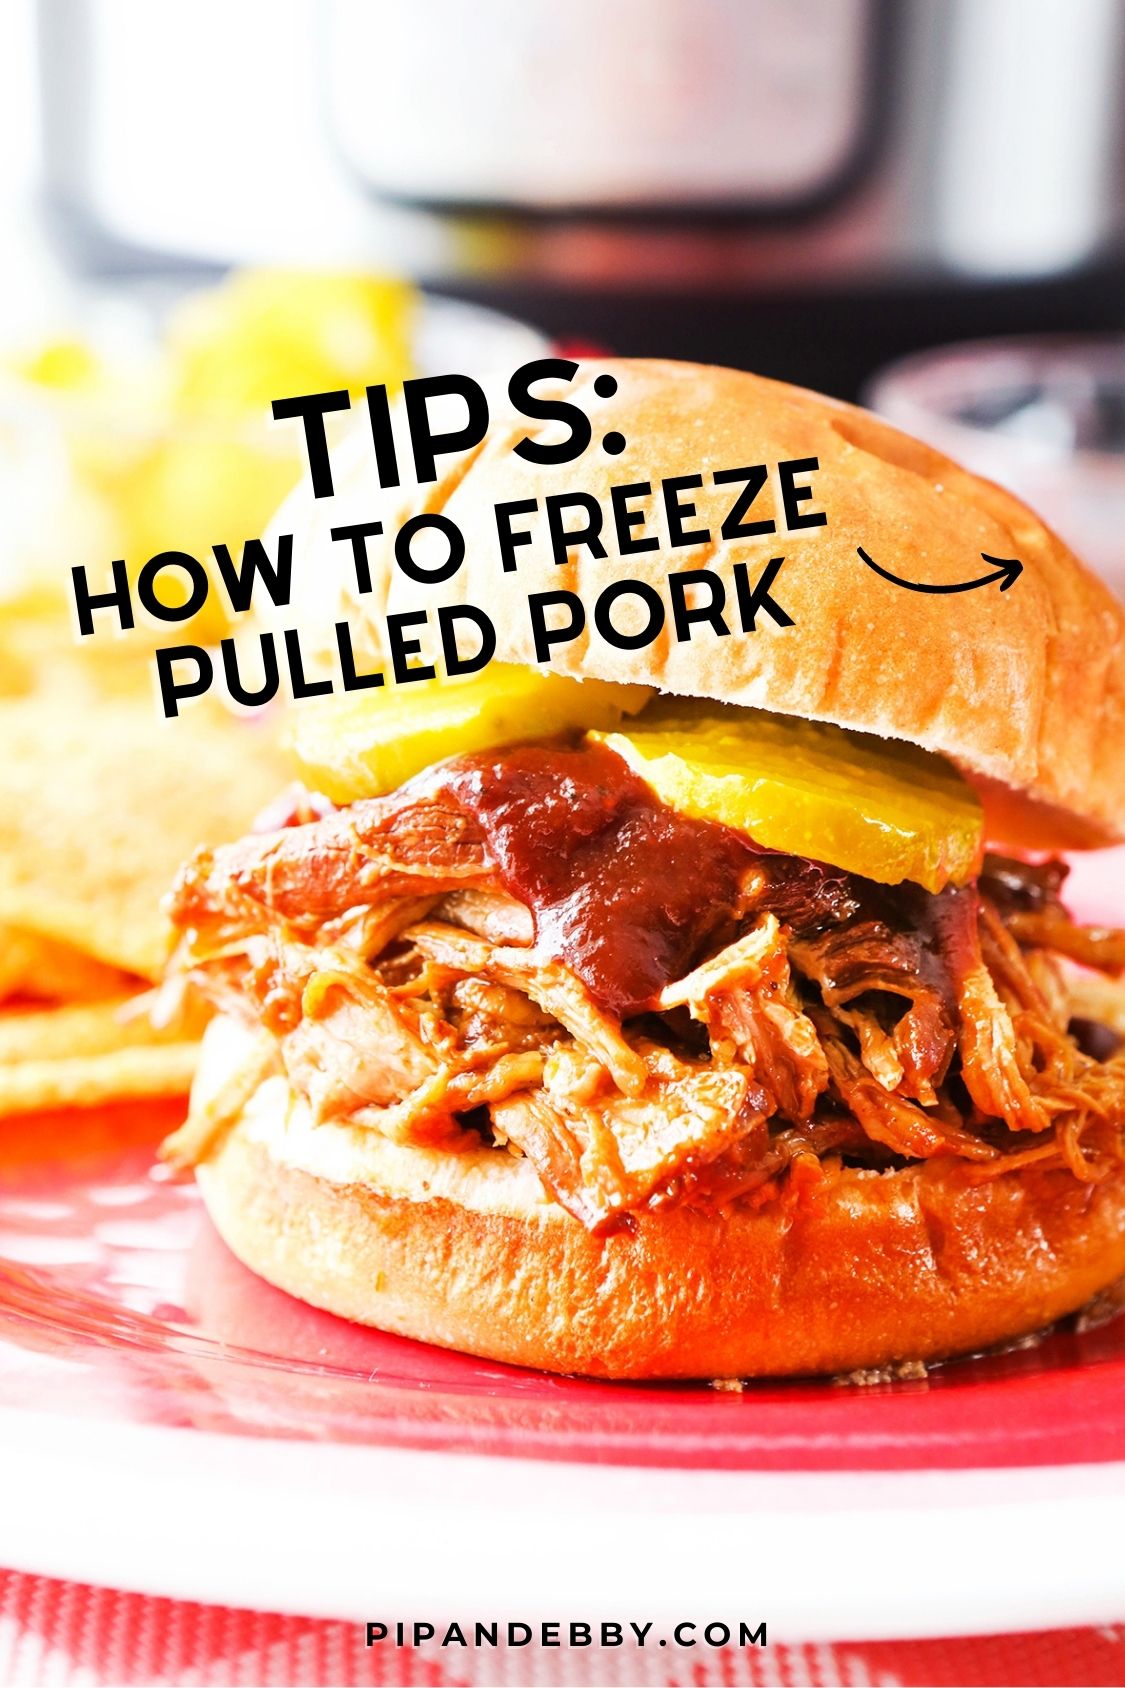 Photo of a pulled pork sandwich with text overlay reading, "Tips: How to freeze pulled pork."